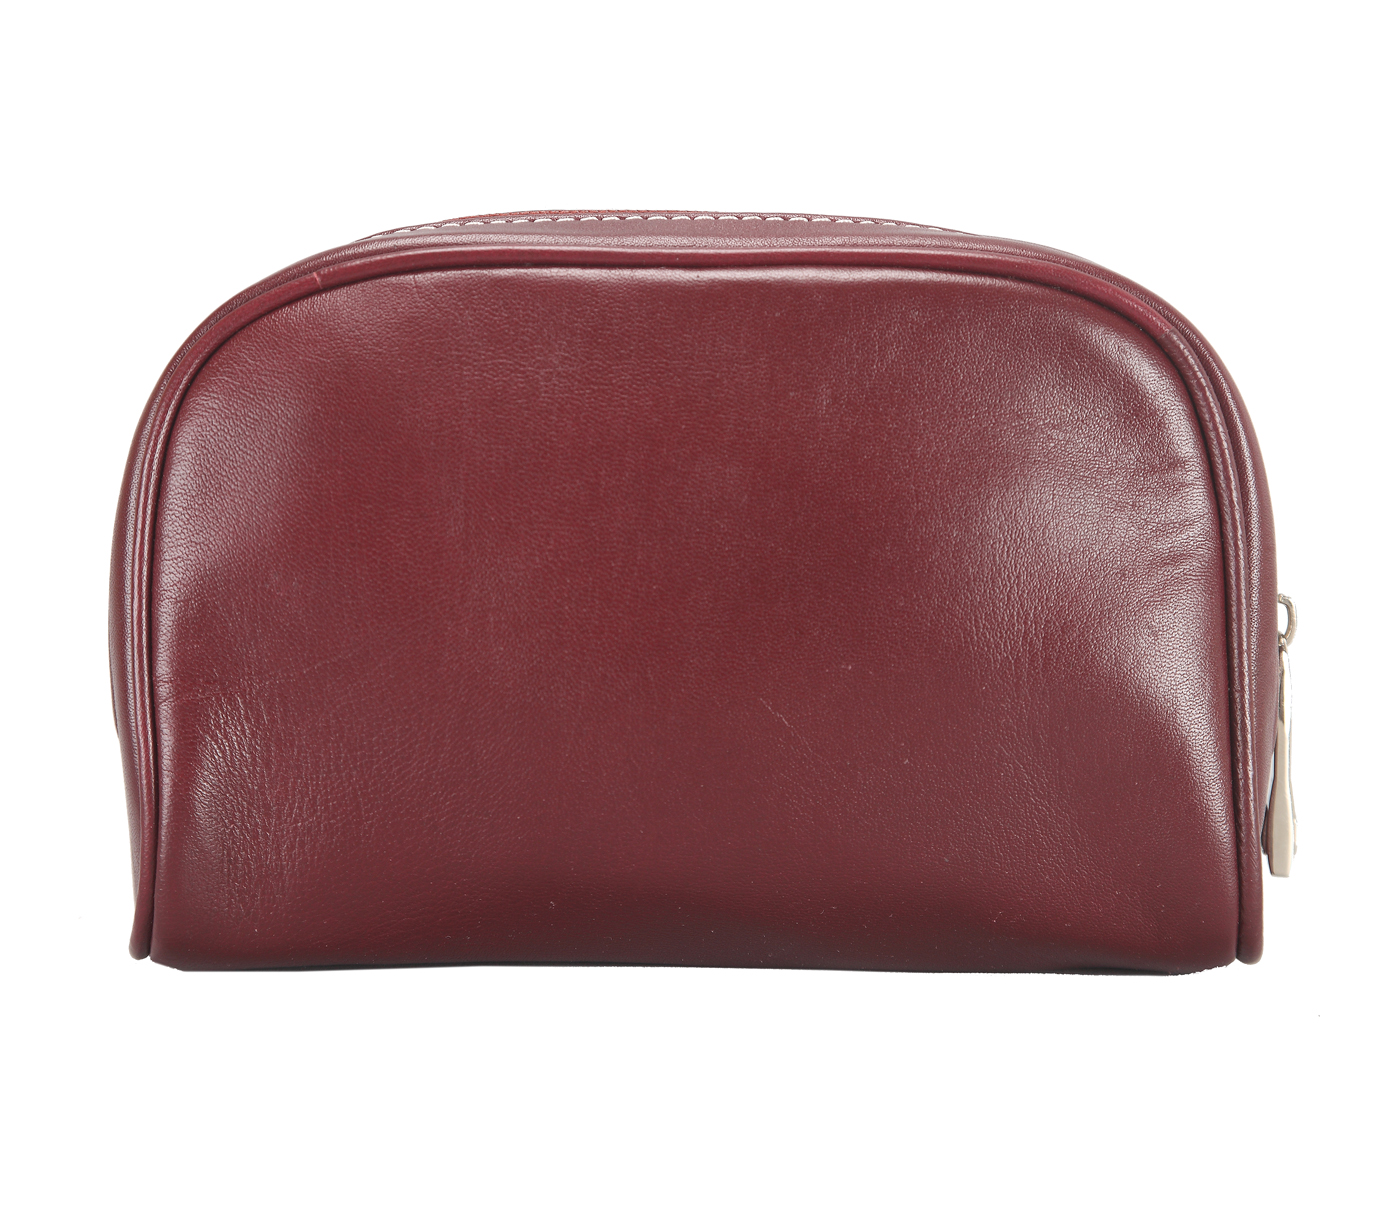 SC4S--Unisex Wash & Toiletry travel Bag in Genuine Leather - Wine